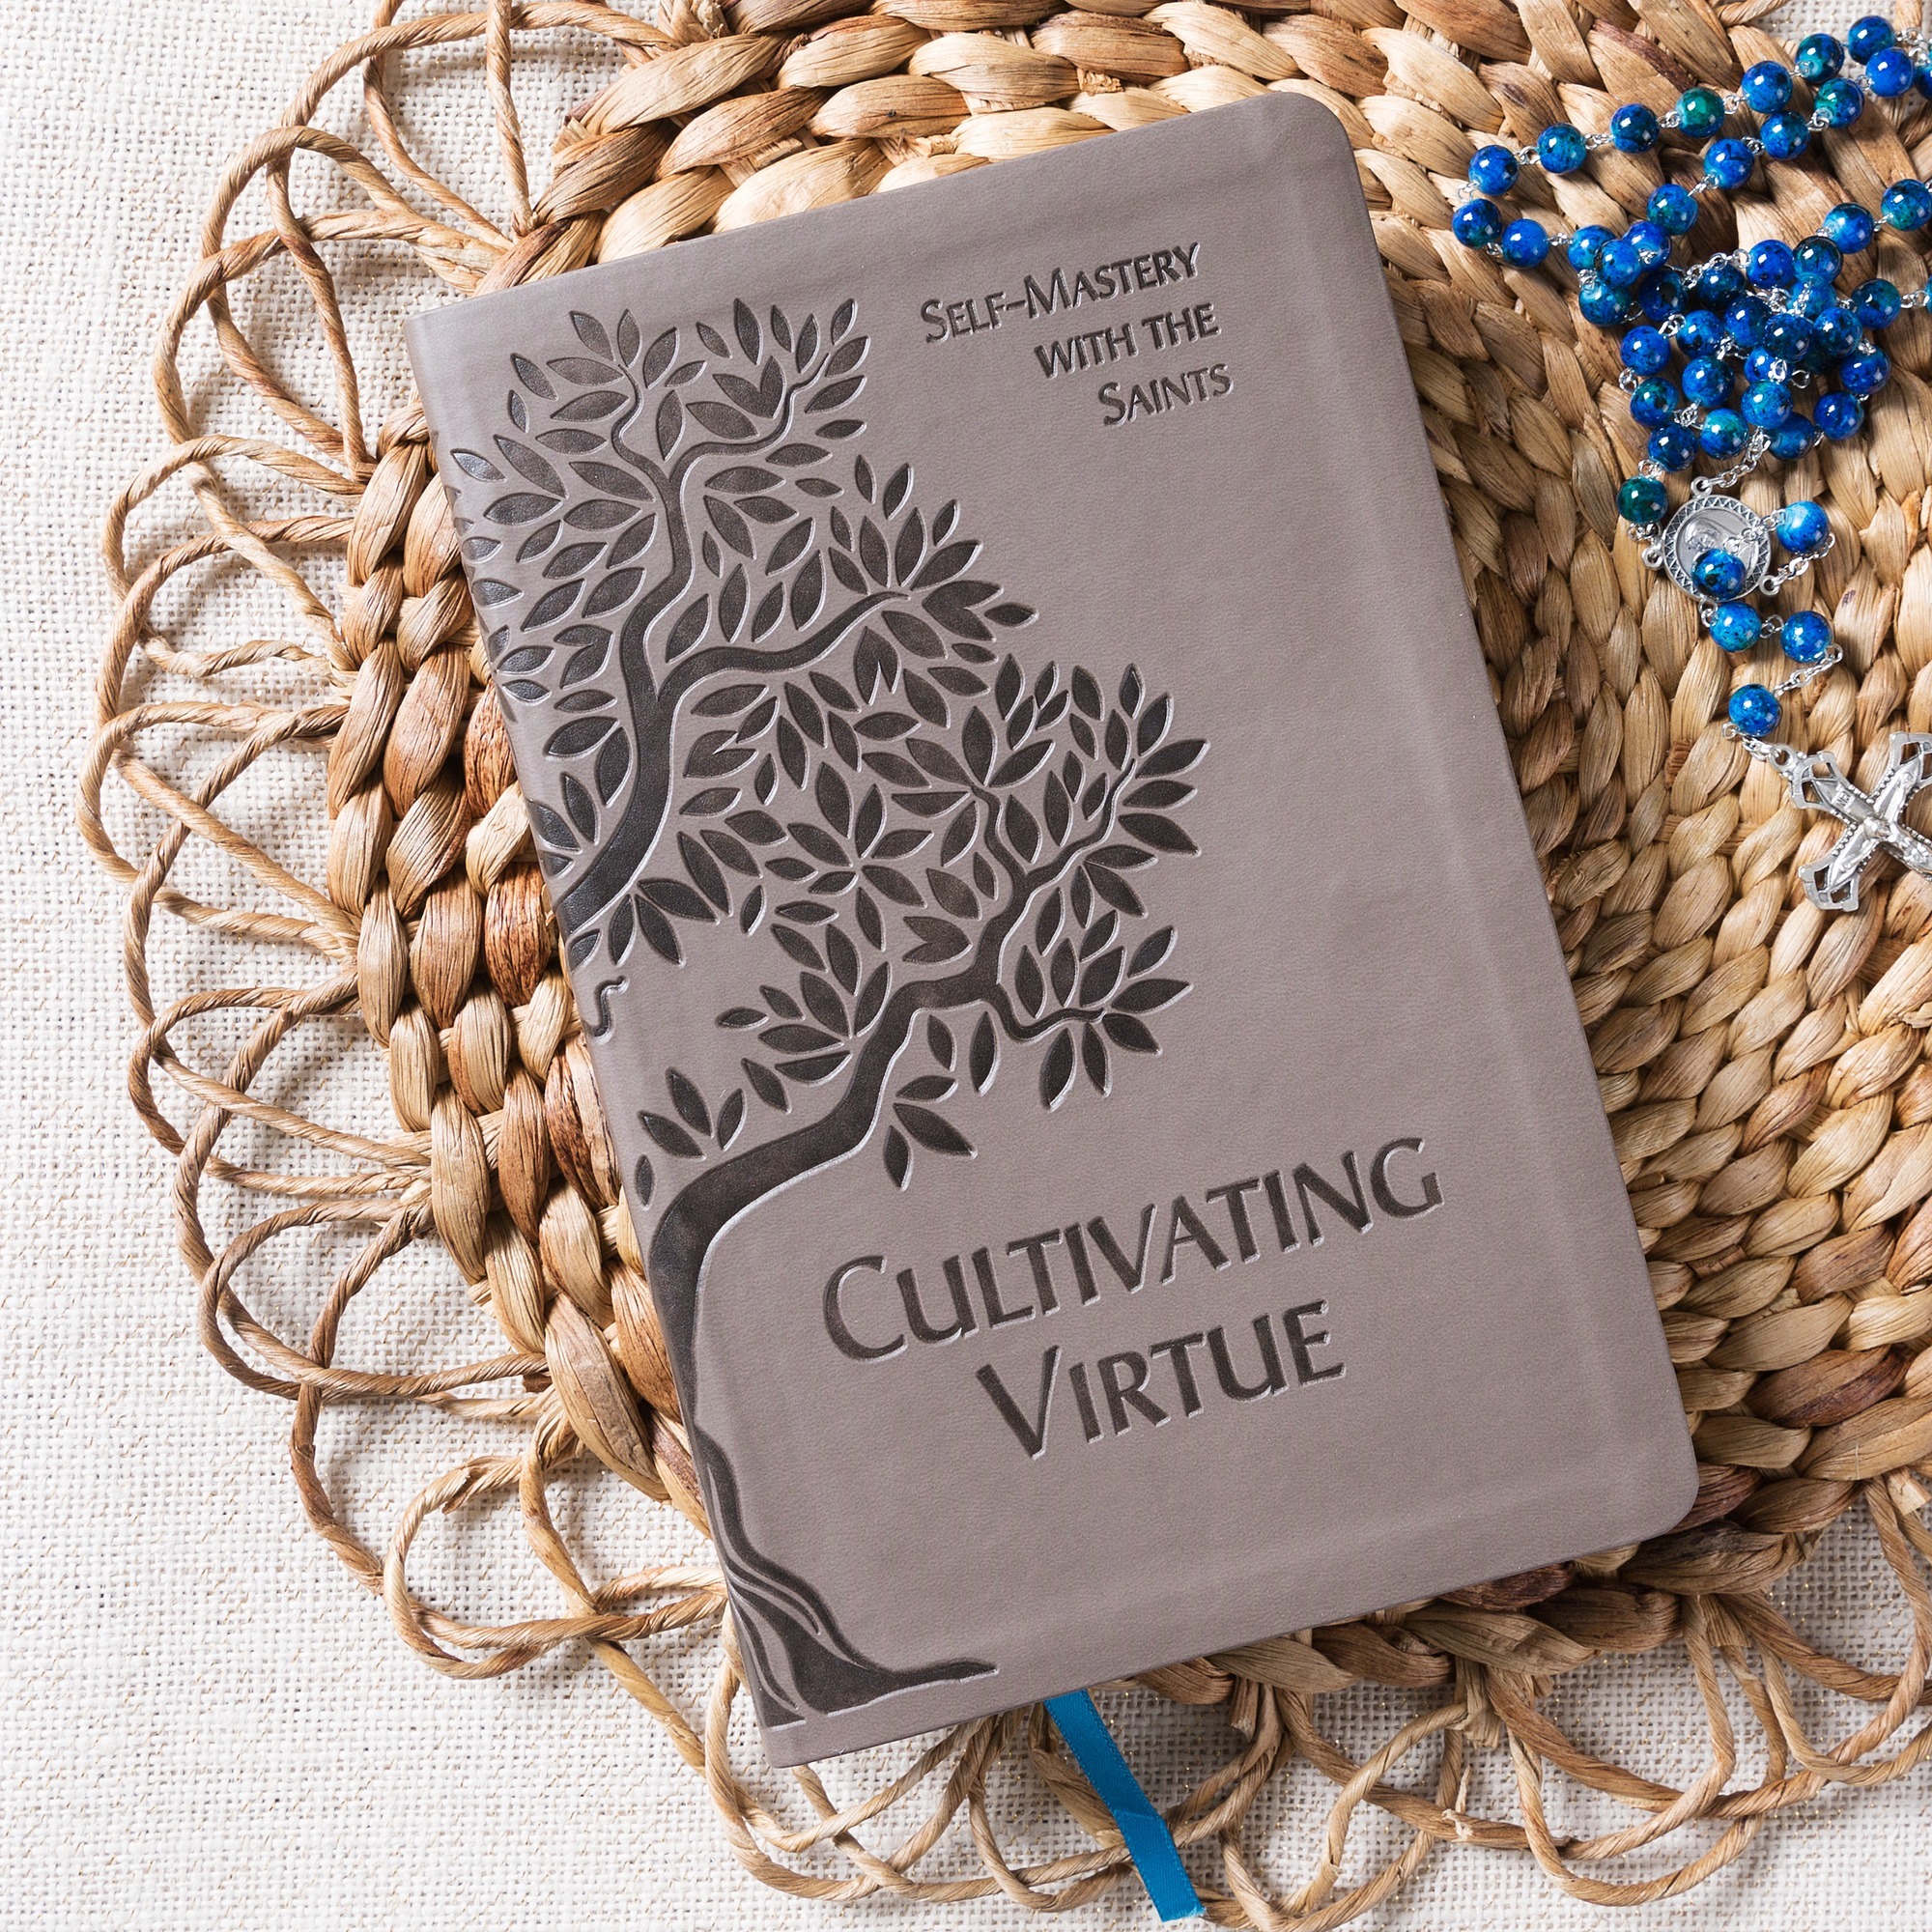 Cultivating Virtue: Self-Mastery With the Saints